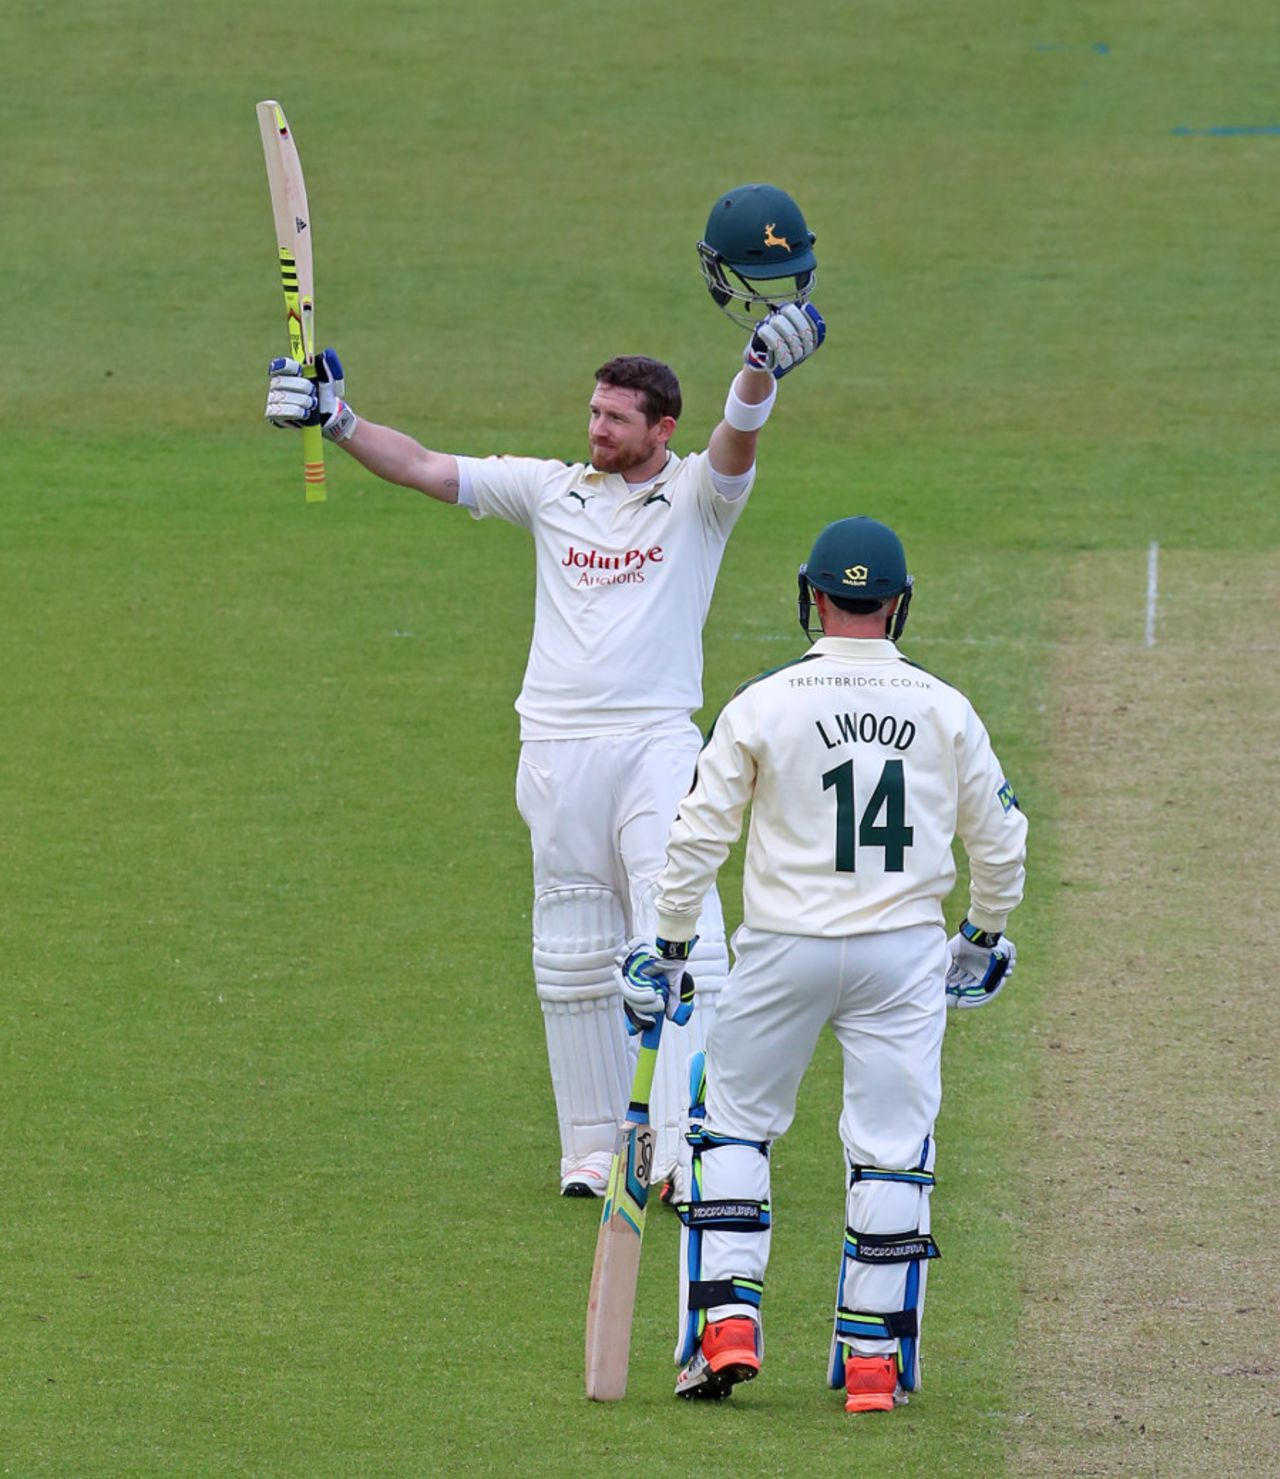 Riki Wessels' hundred helped rescue Nottinghamshire, Durham v Nottinghamshire, County Championship, Division One, 1st day Chester-le-Street, May 10, 2015